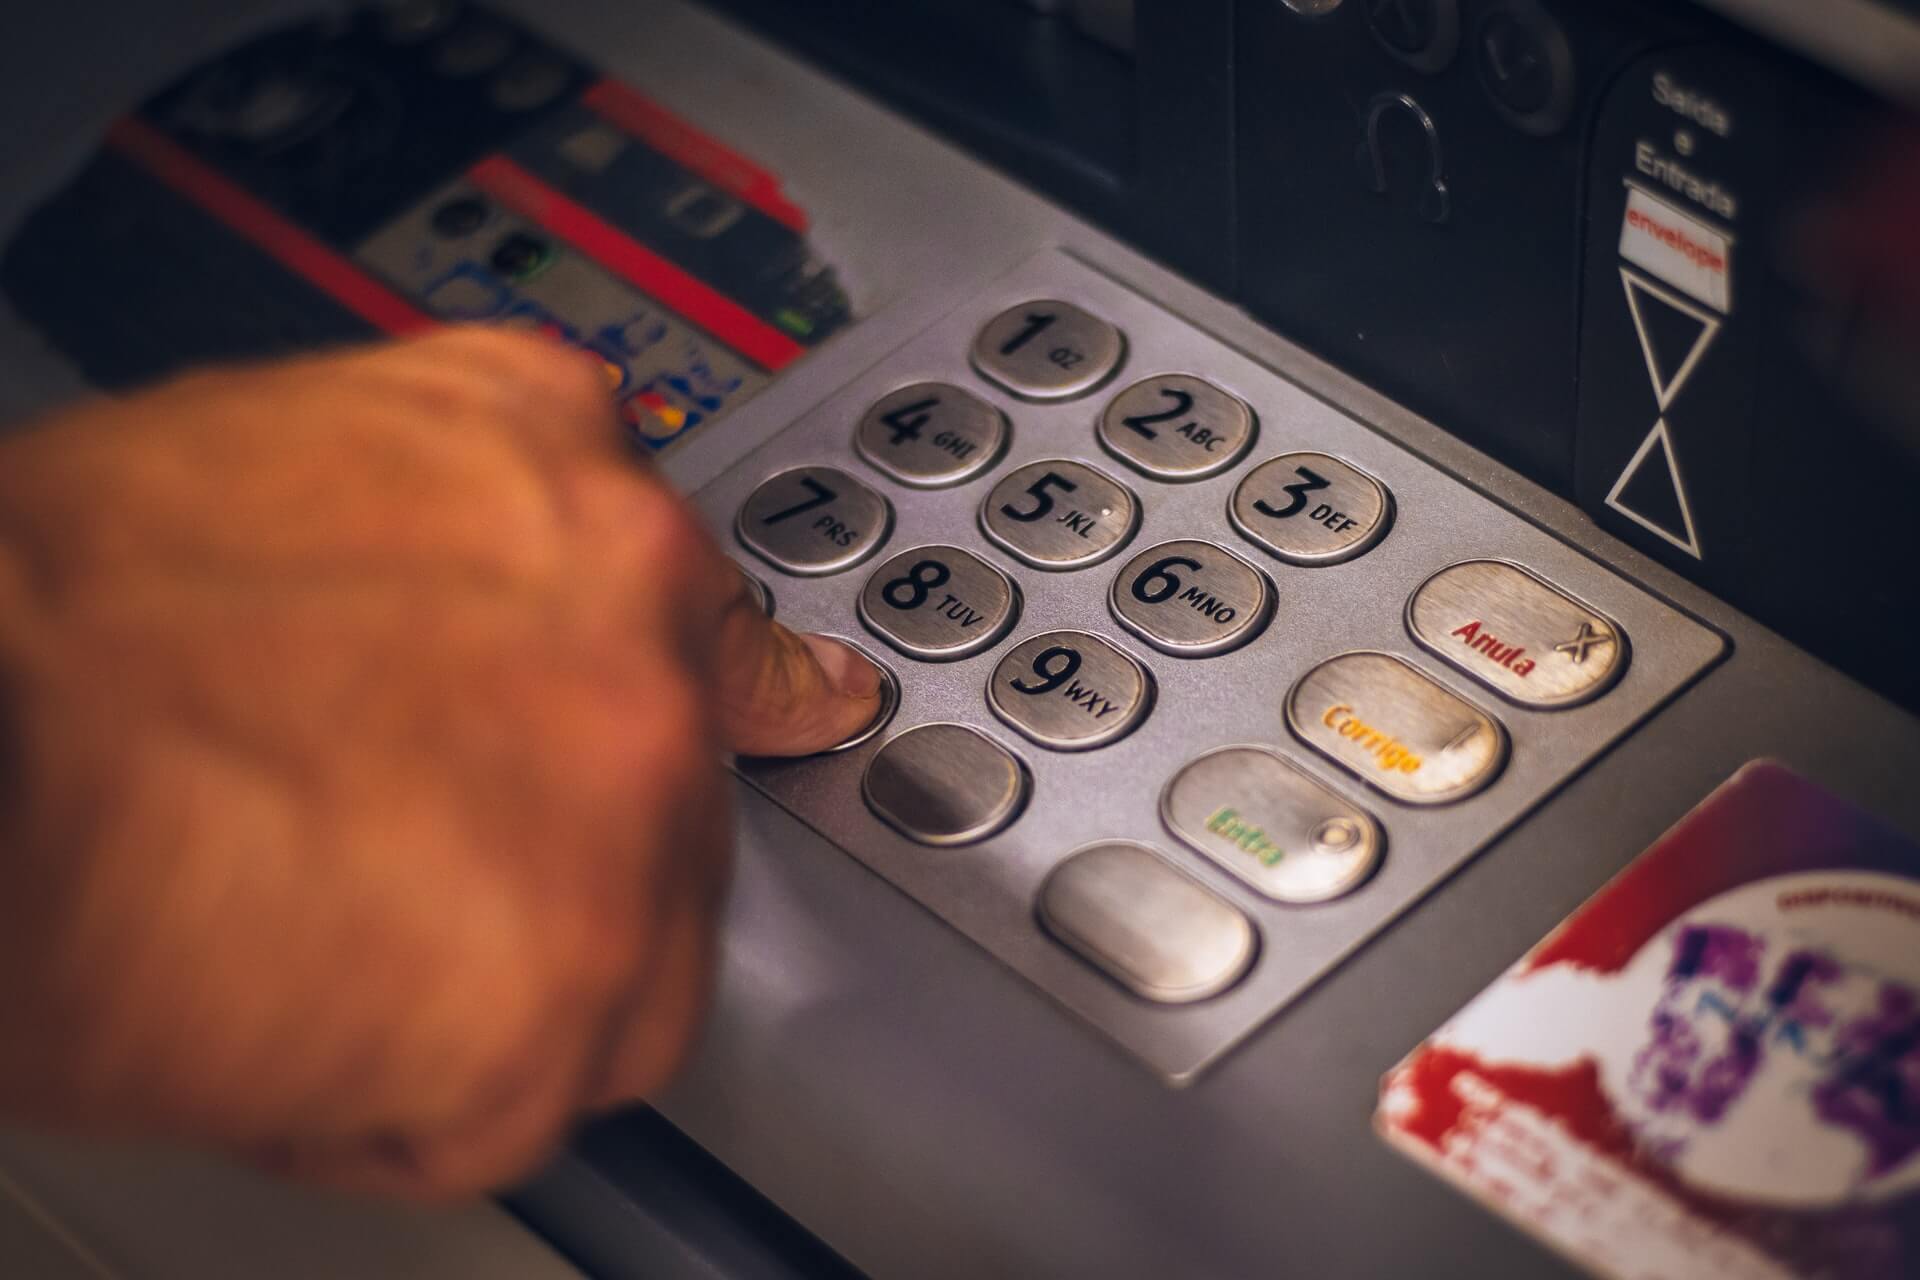 Close up photo of person inputting pin at an atm machine